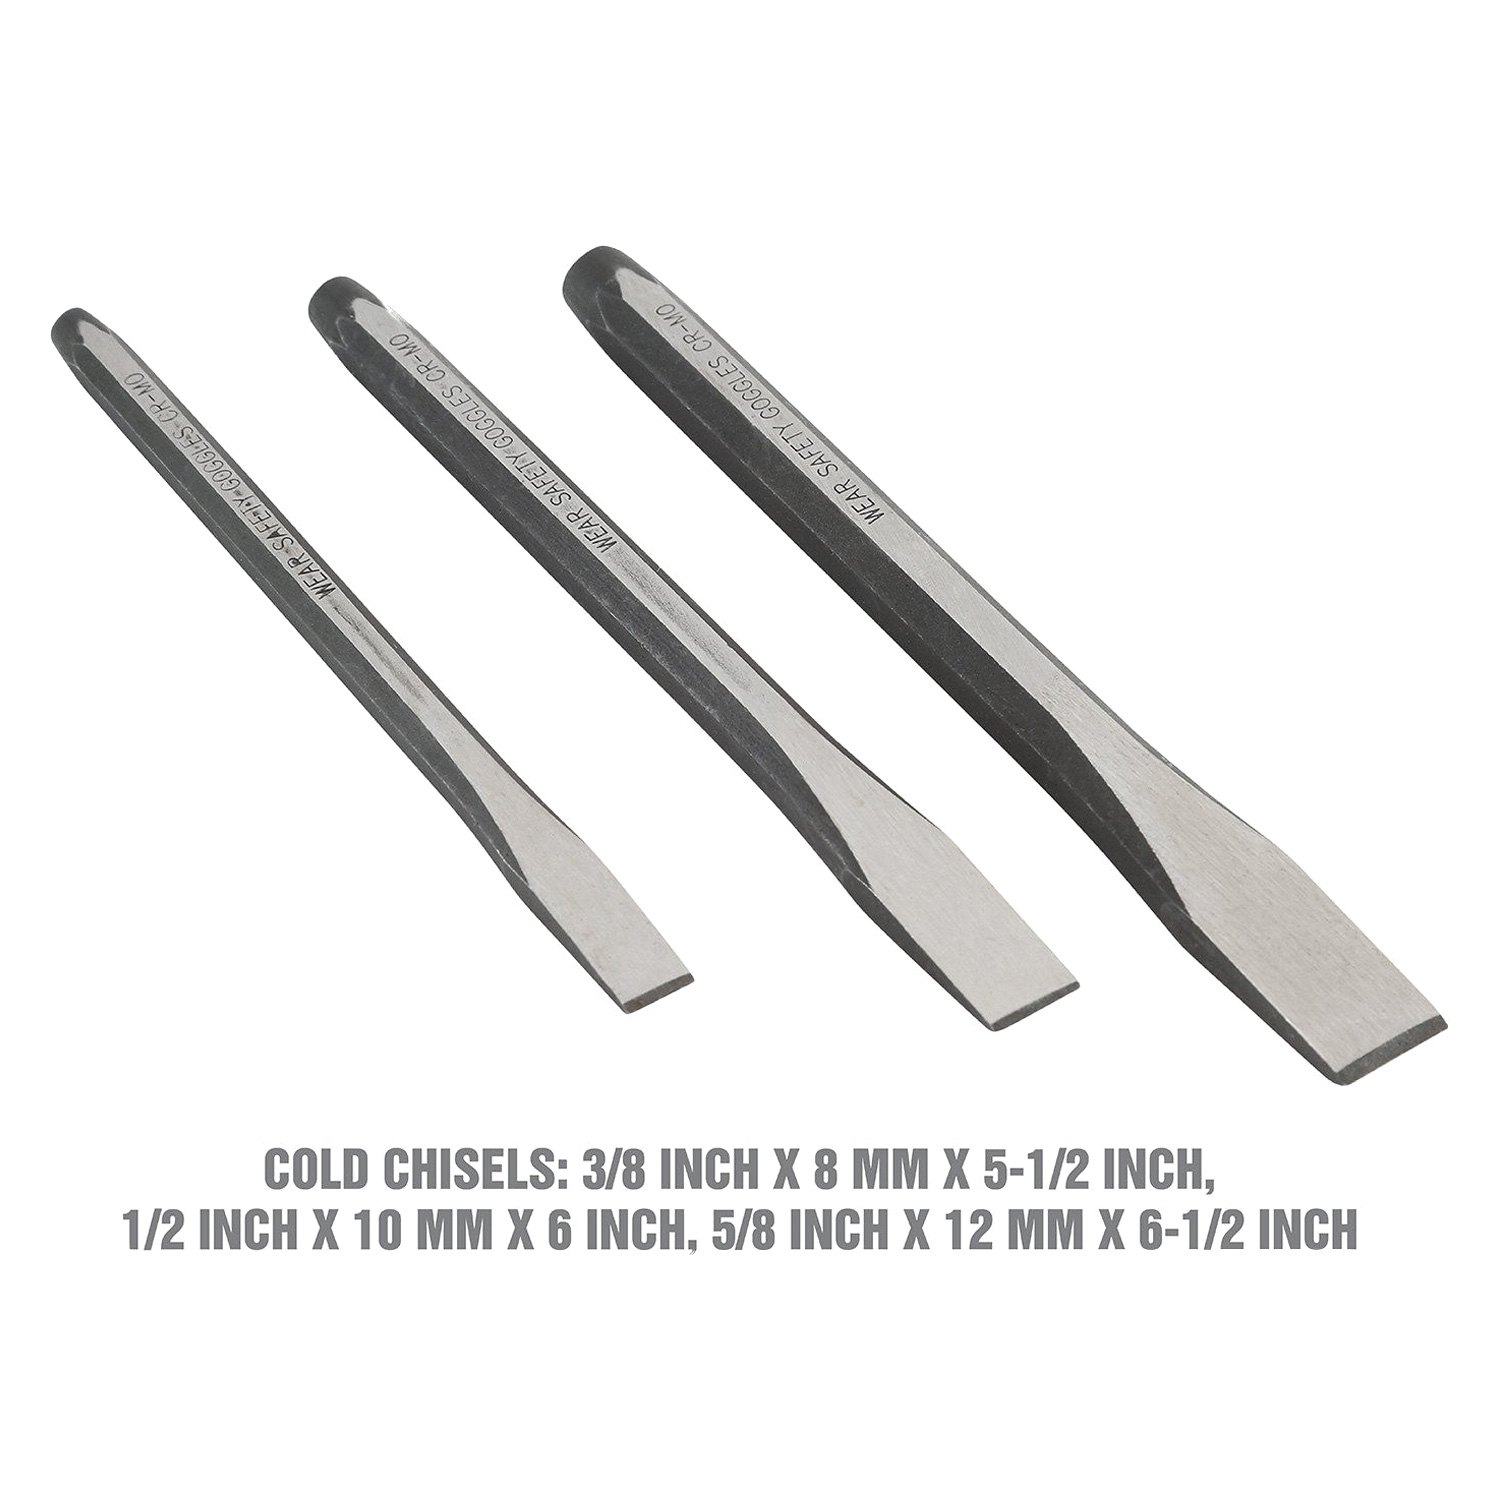 OEM Tools® 23996 - 11-piece Punch and Chisel Mixed Set - TOOLSiD.com